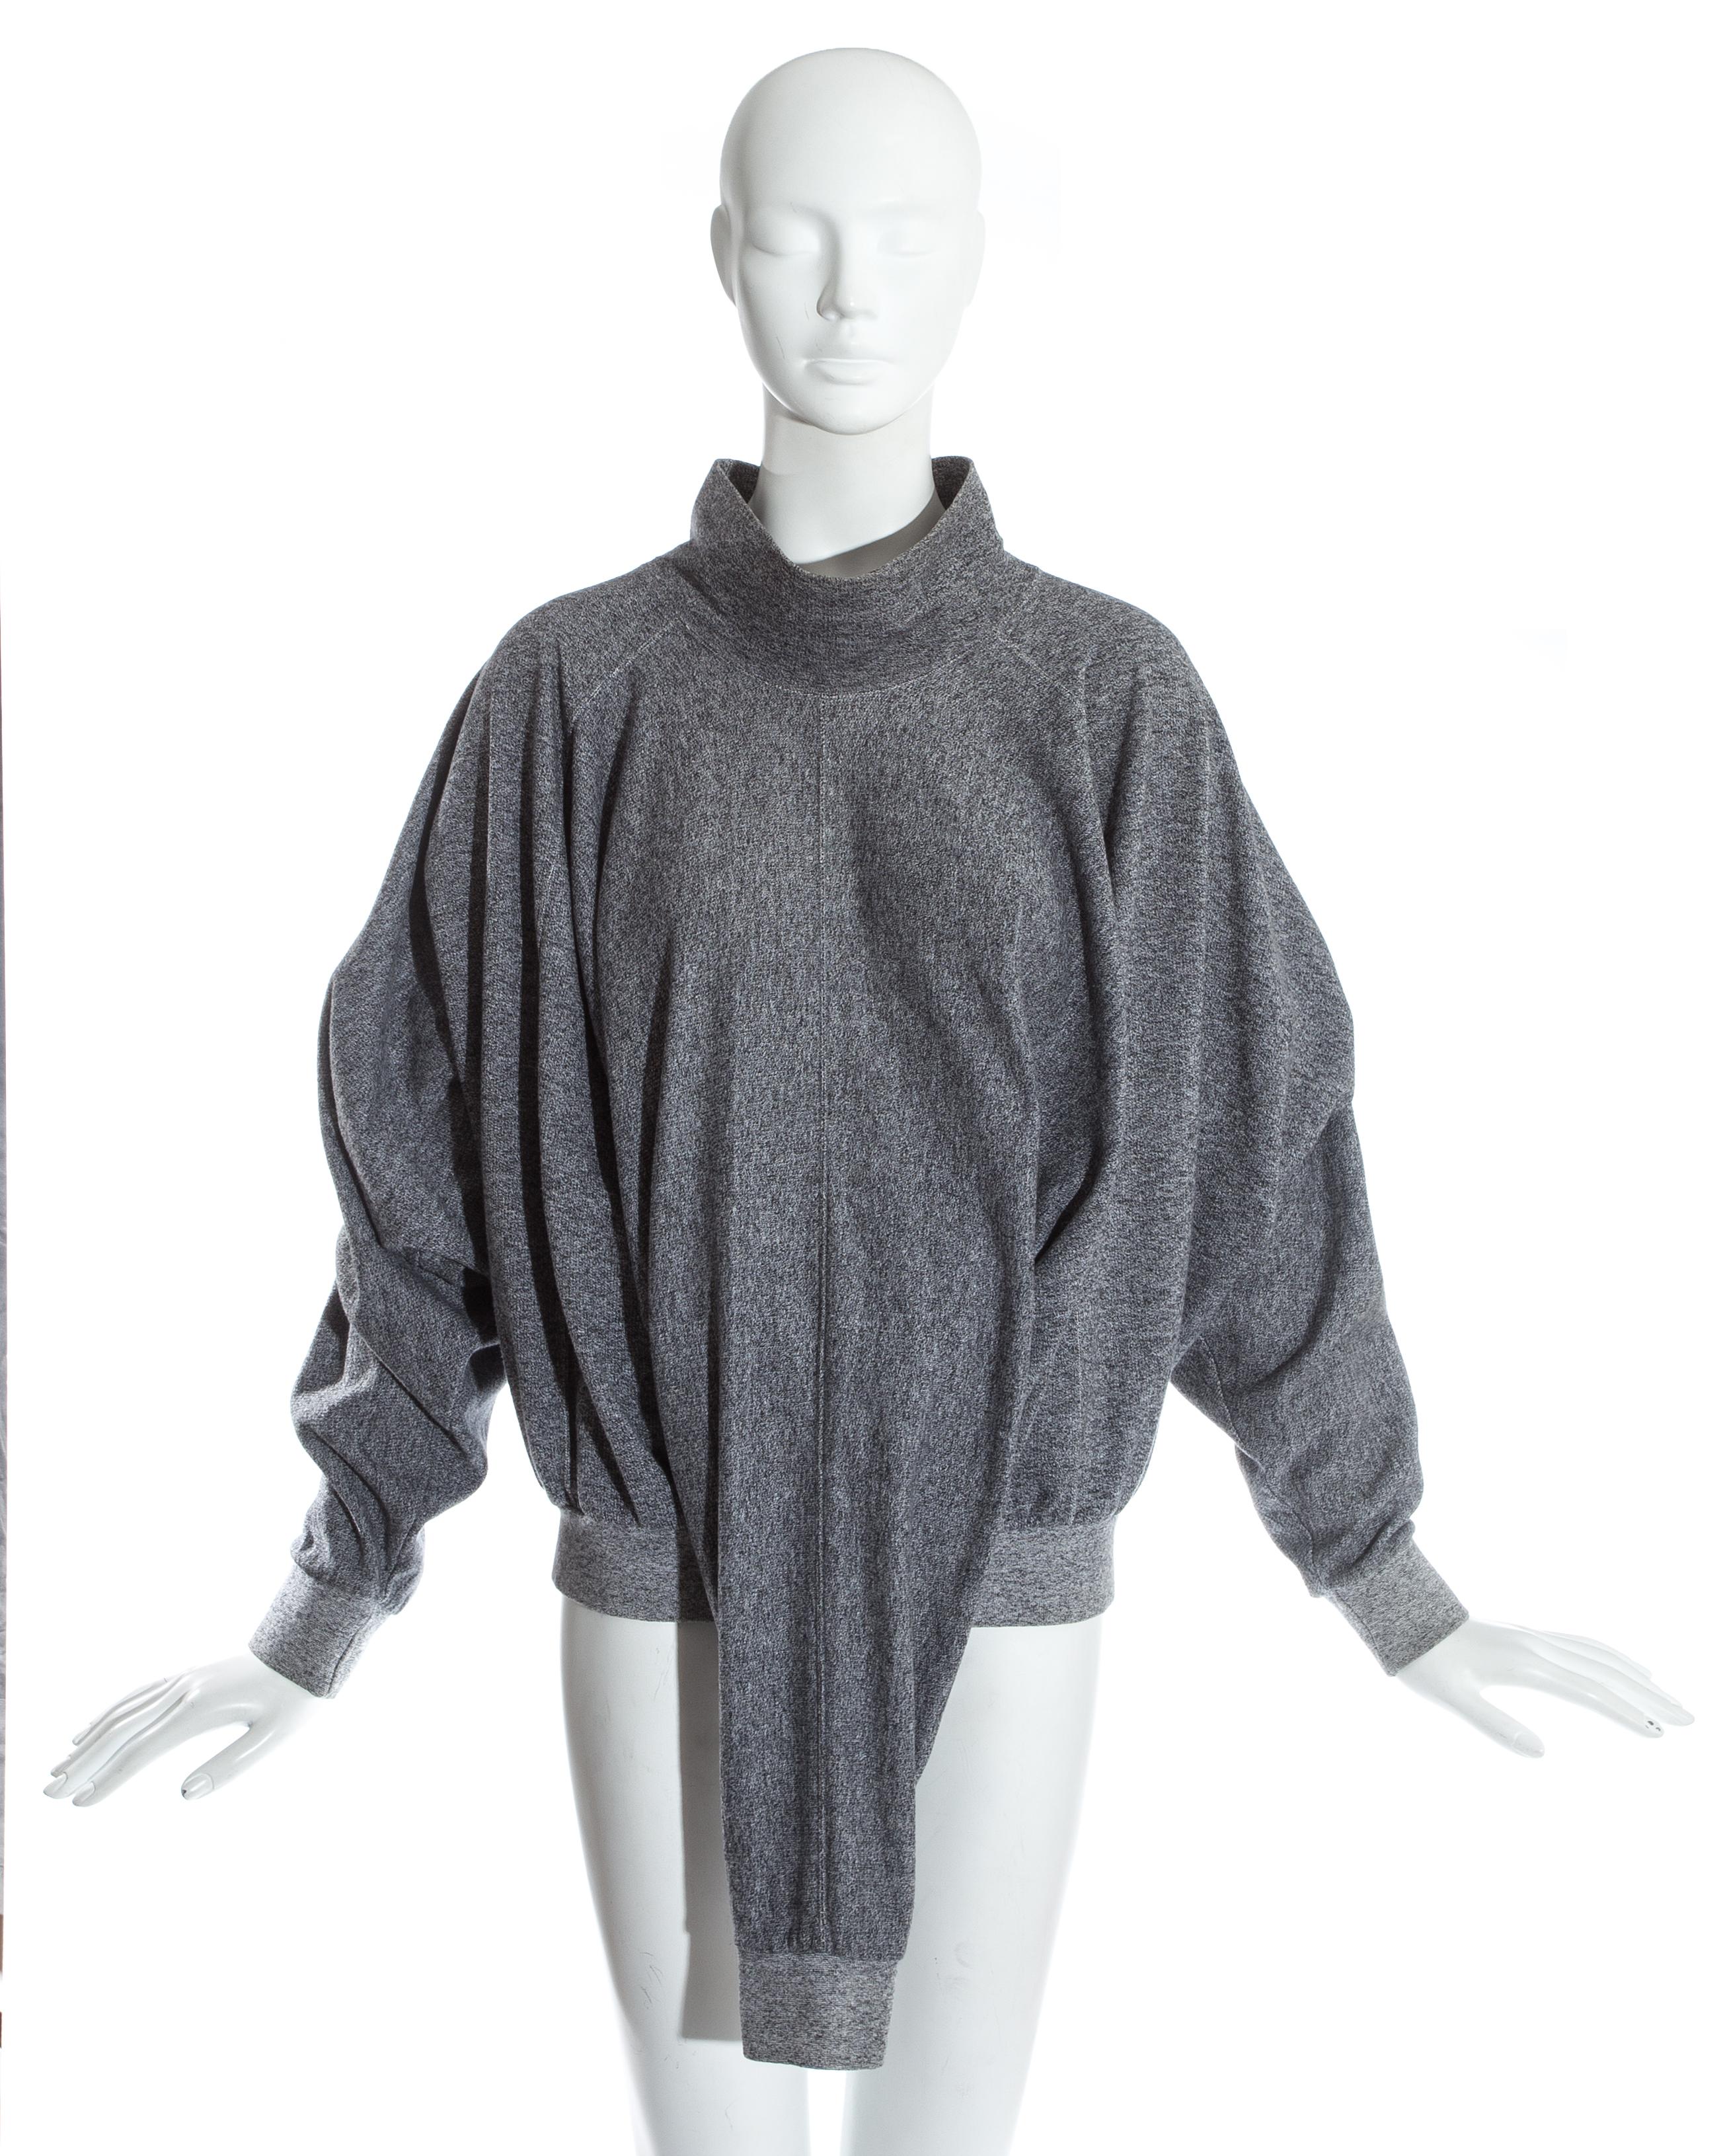 Issey Miyake; Grey knitted turtle neck sweater with three sleeves. The sweater can be styled in various ways. 

'Parts Knit' Fall-Winter 1985
